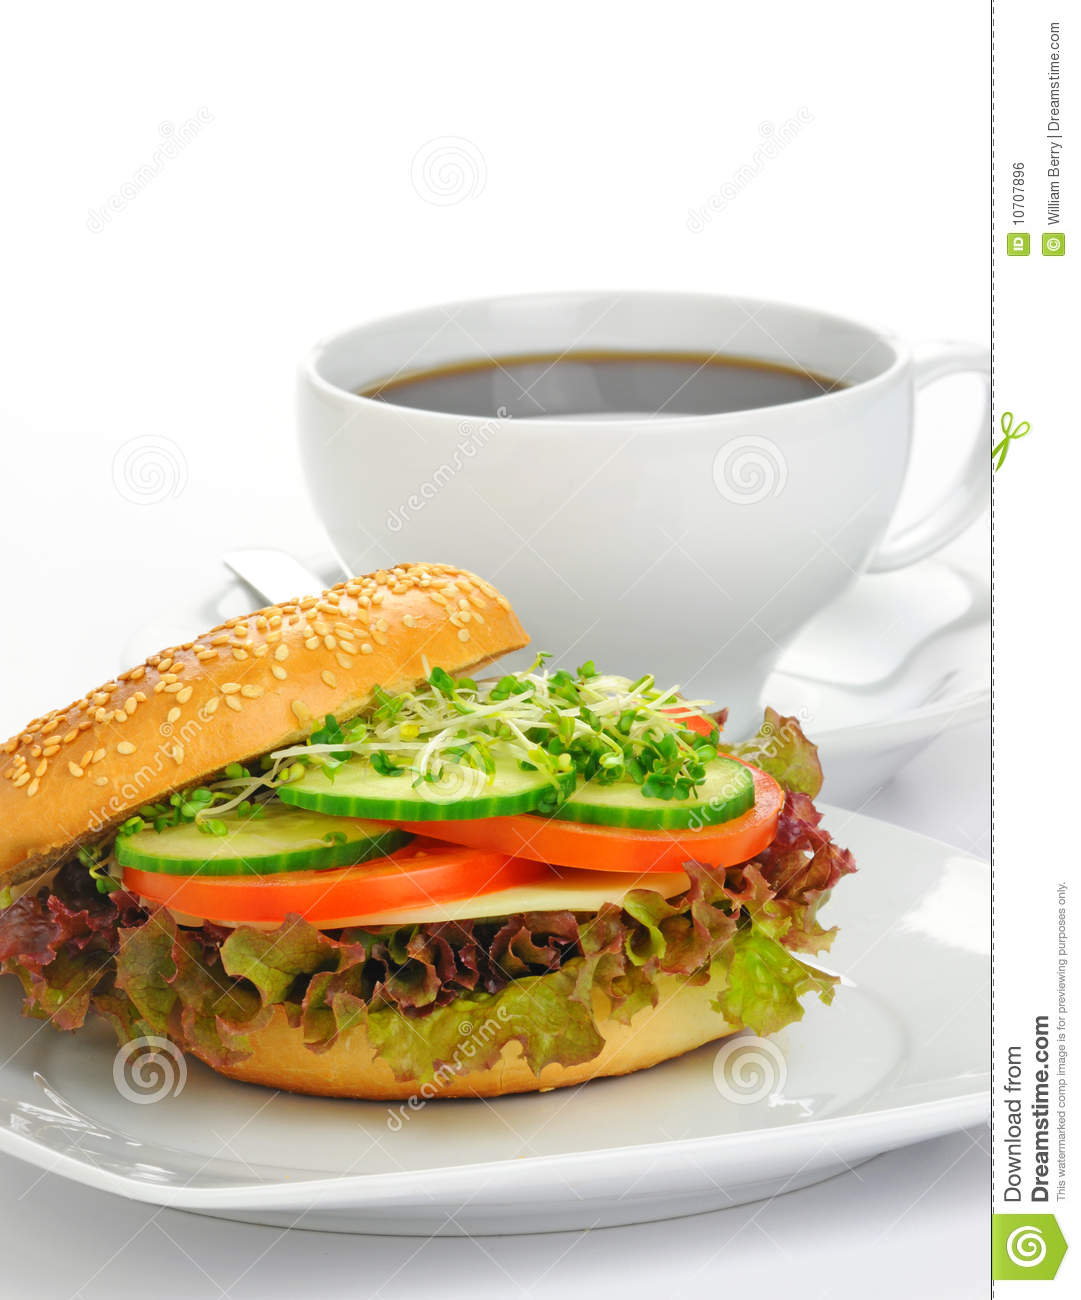 Delicious Bagel Sandwich Royalty Free Stock Image   Image  10707896